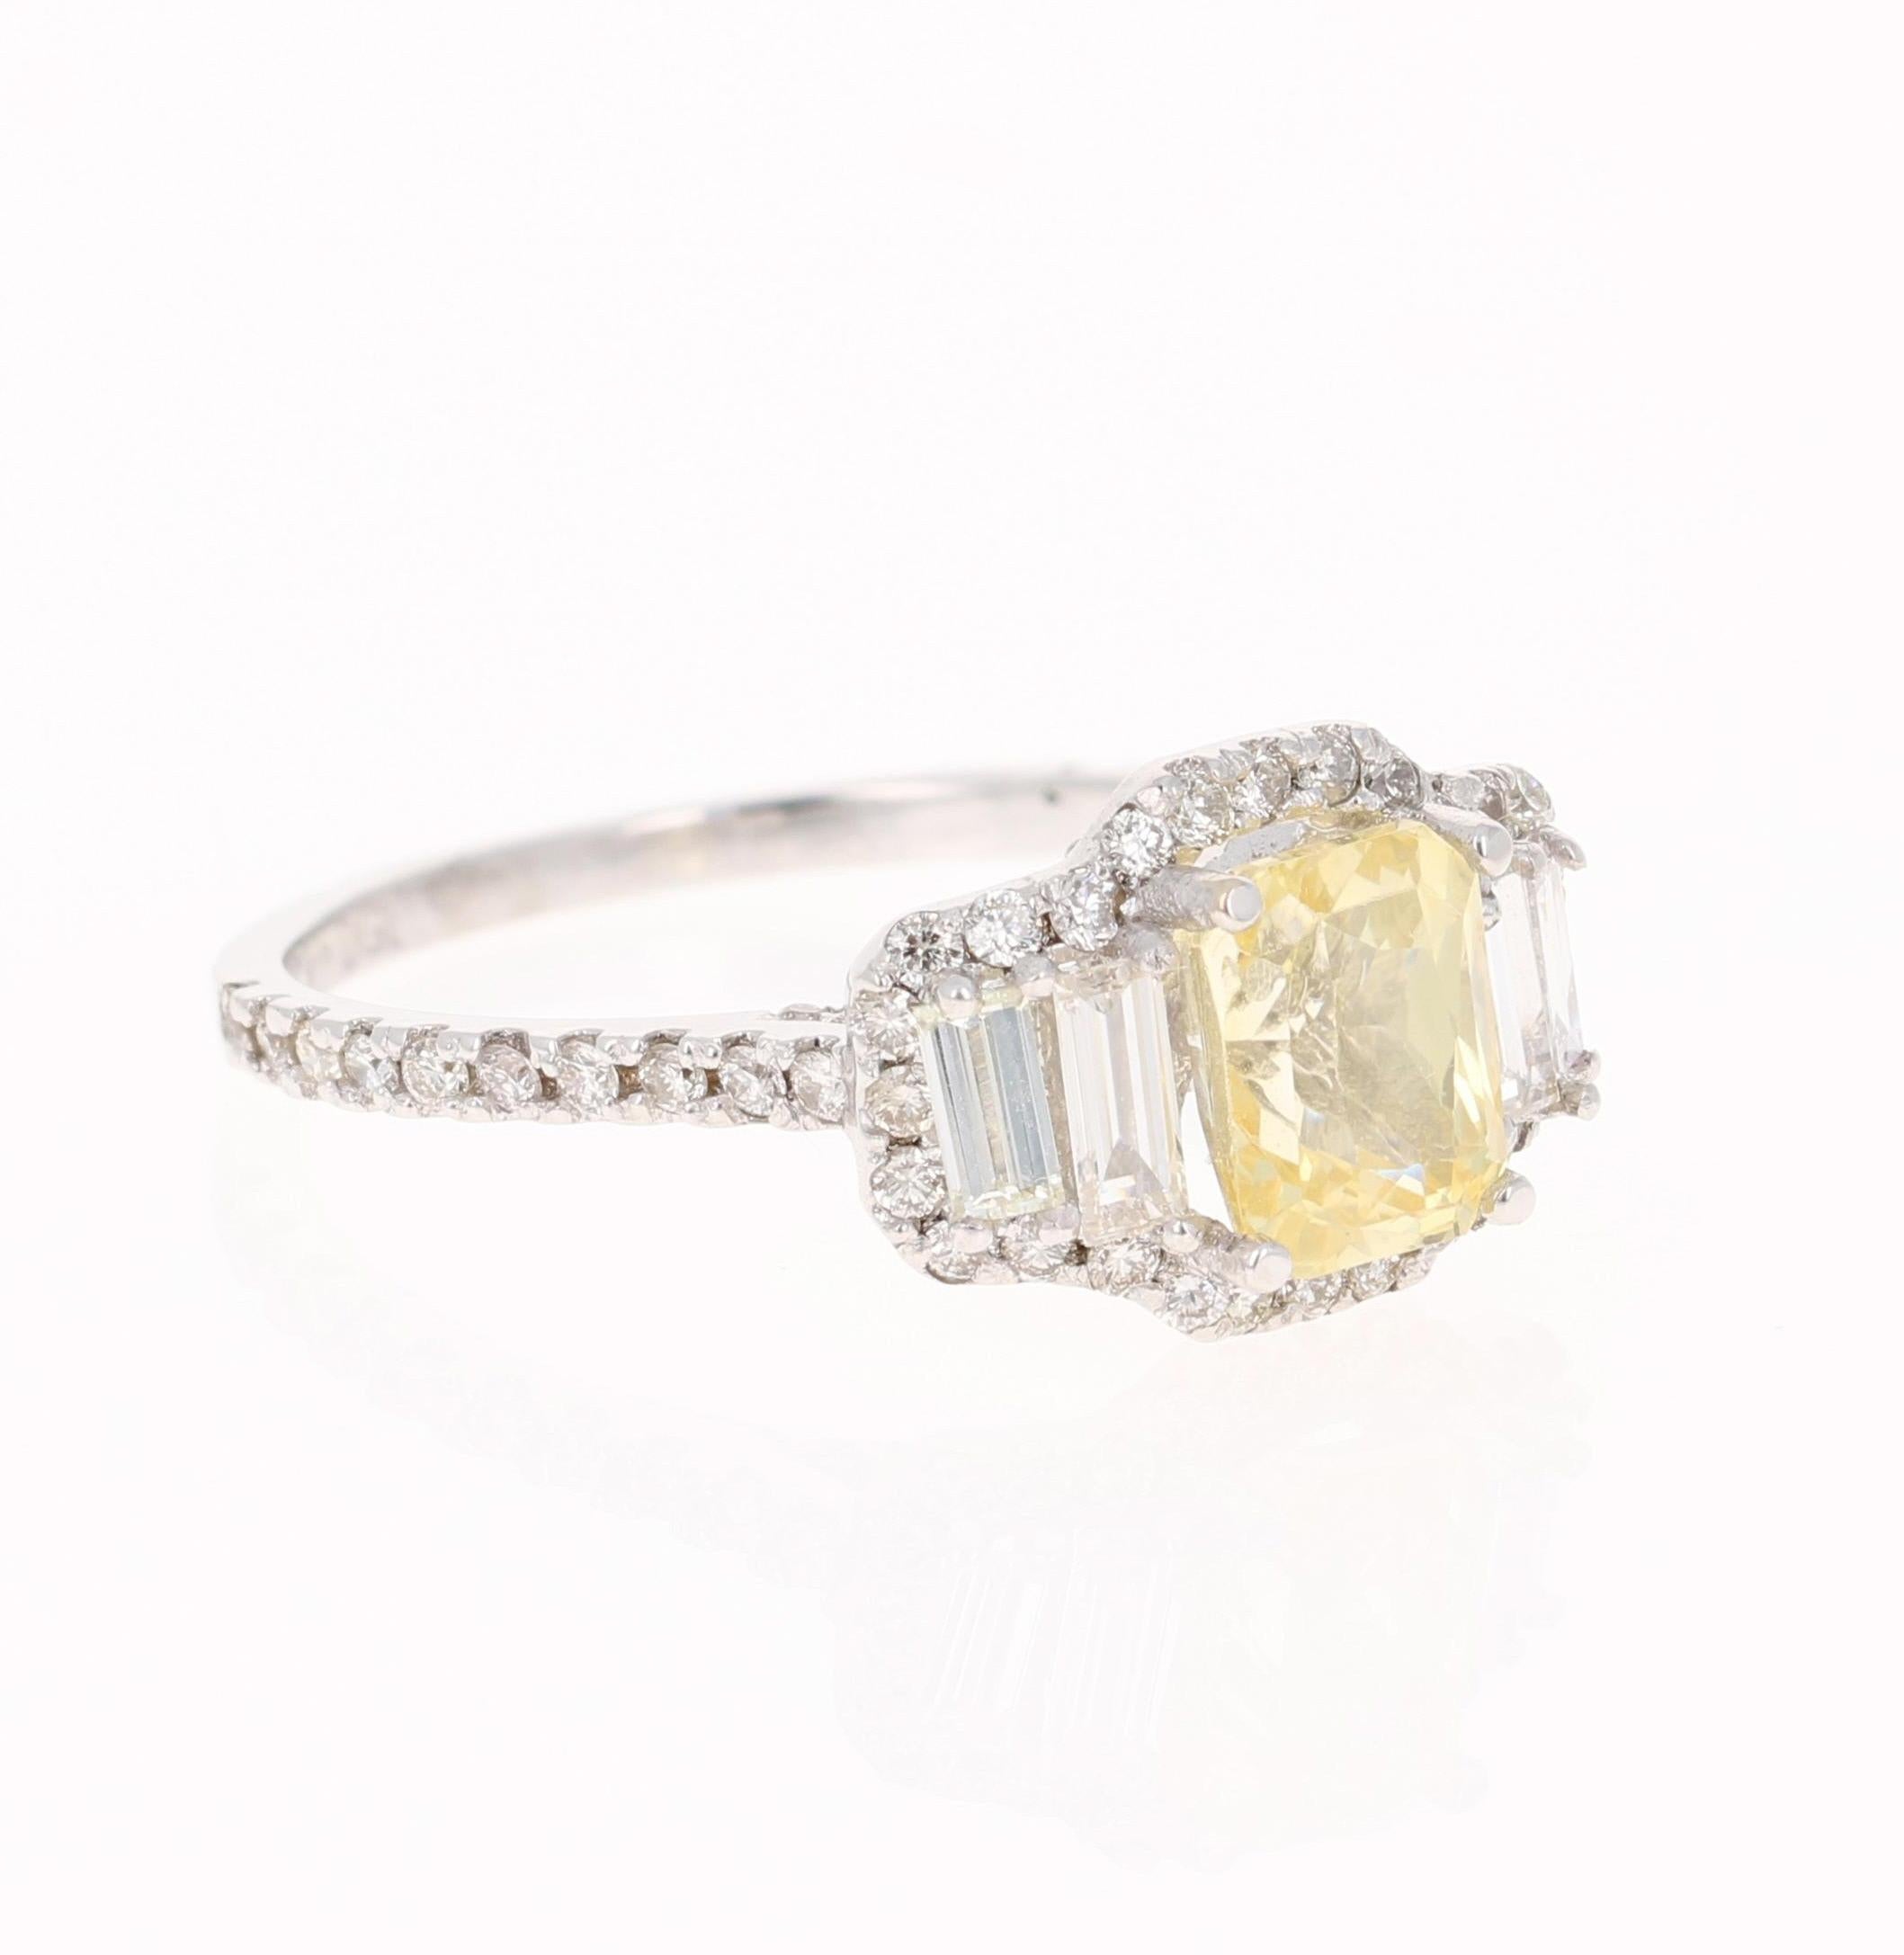 A gorgeous Yellow Sapphire Ring in a classic halo setting and resembling a three-stone ring! This gorgeous Emerald Cut Yellow Sapphire is a natural, NO heat Sapphire that weighs 2.08 Carats.  
It has 86 Round Cut Diamonds that weigh 0.65 carats